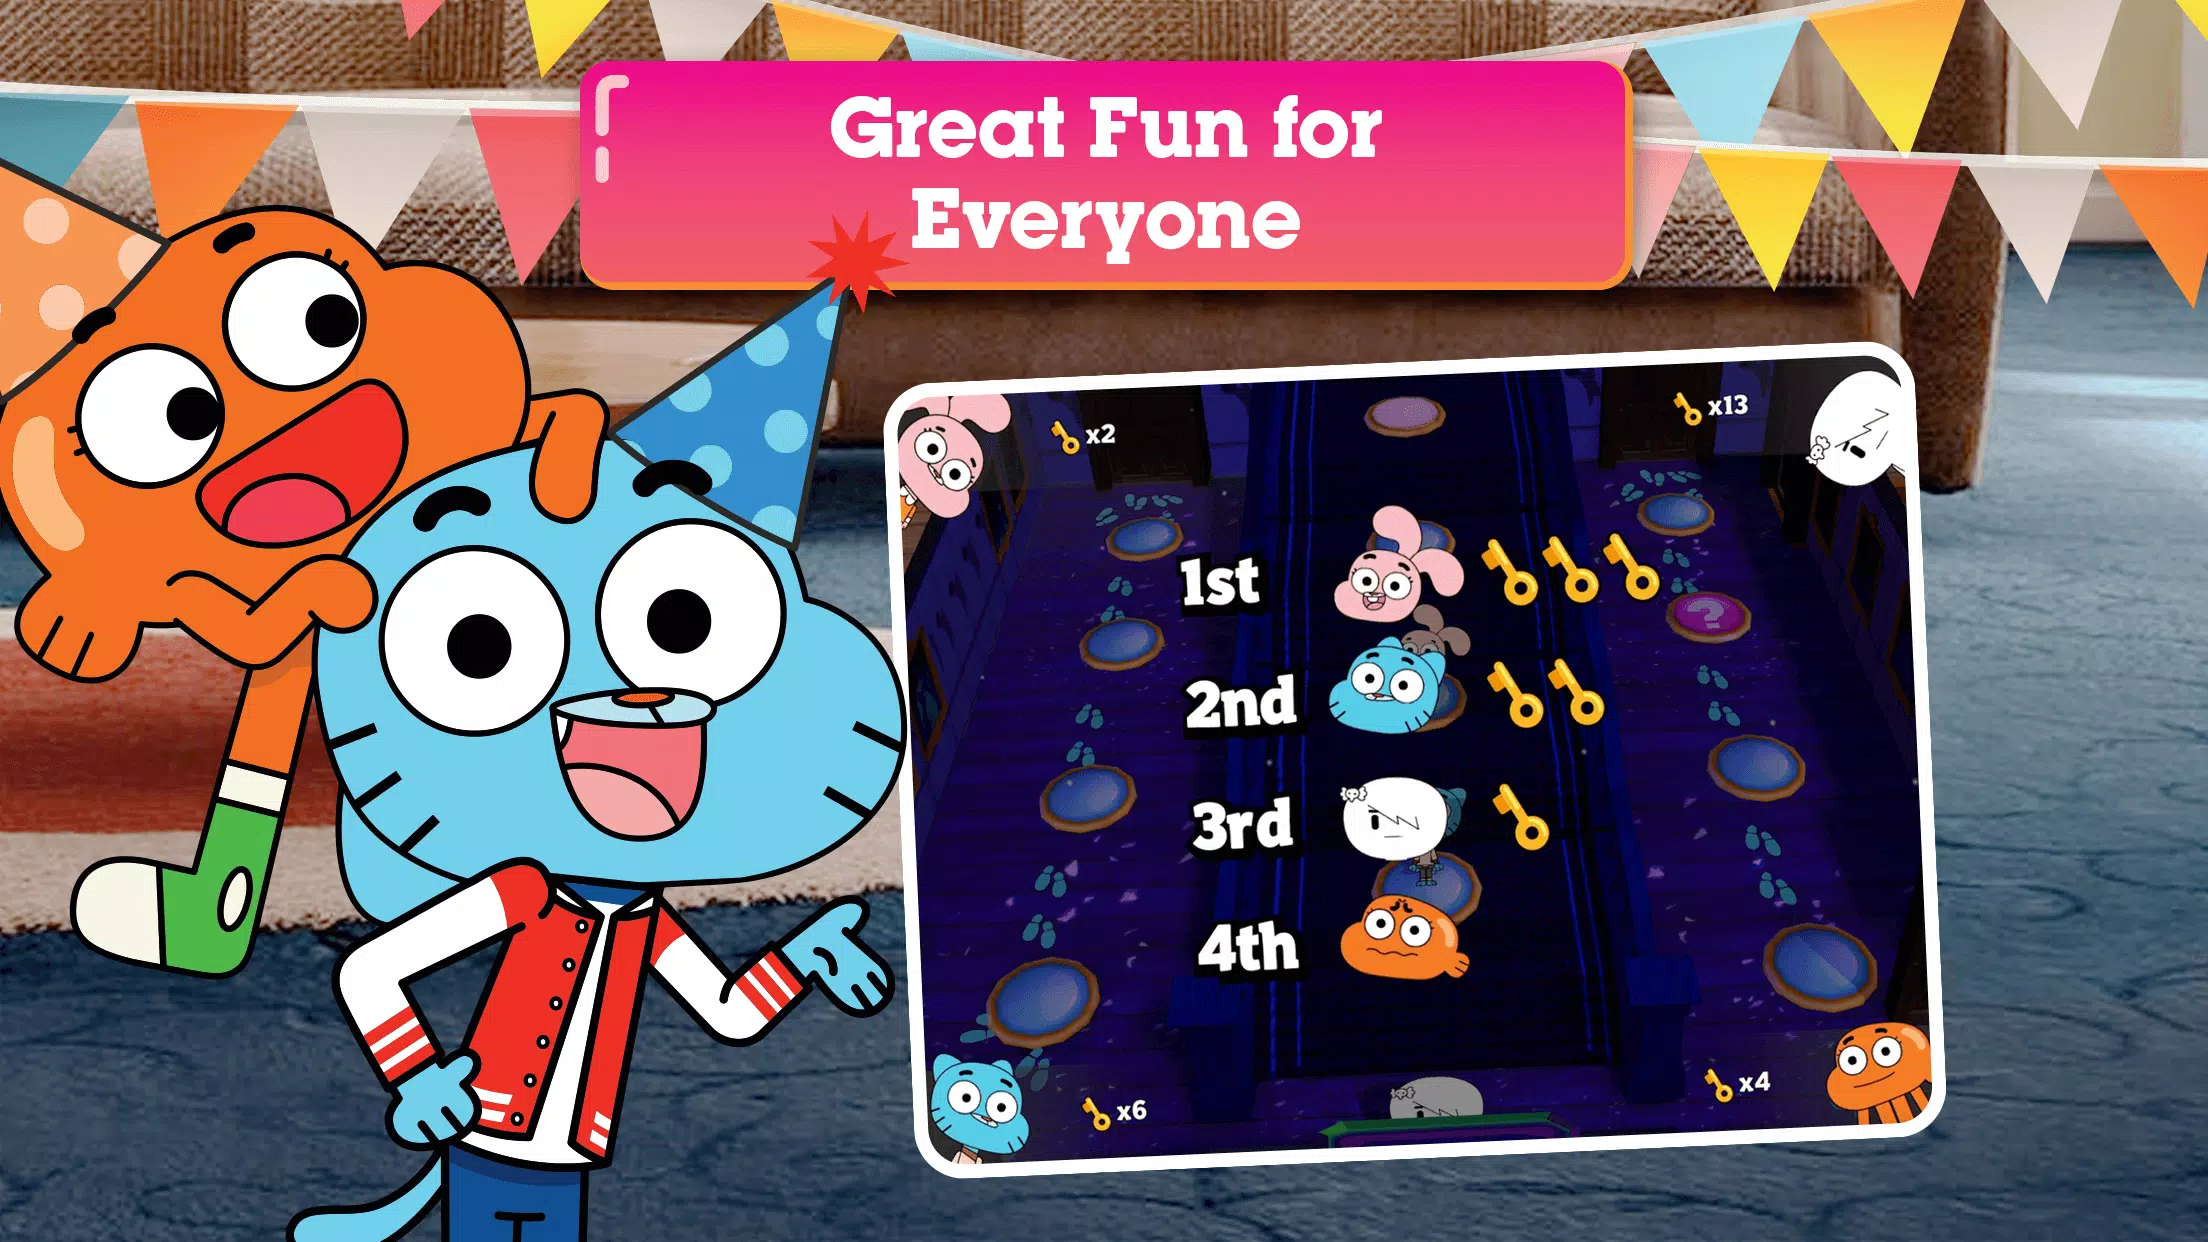 Gumball's Amazing Party Game APK for Android Download